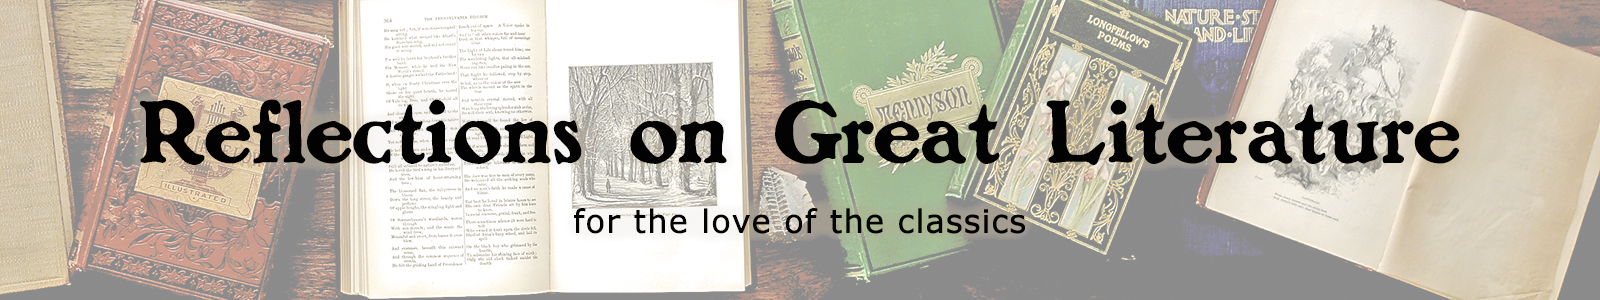 Reflections on Great Literature